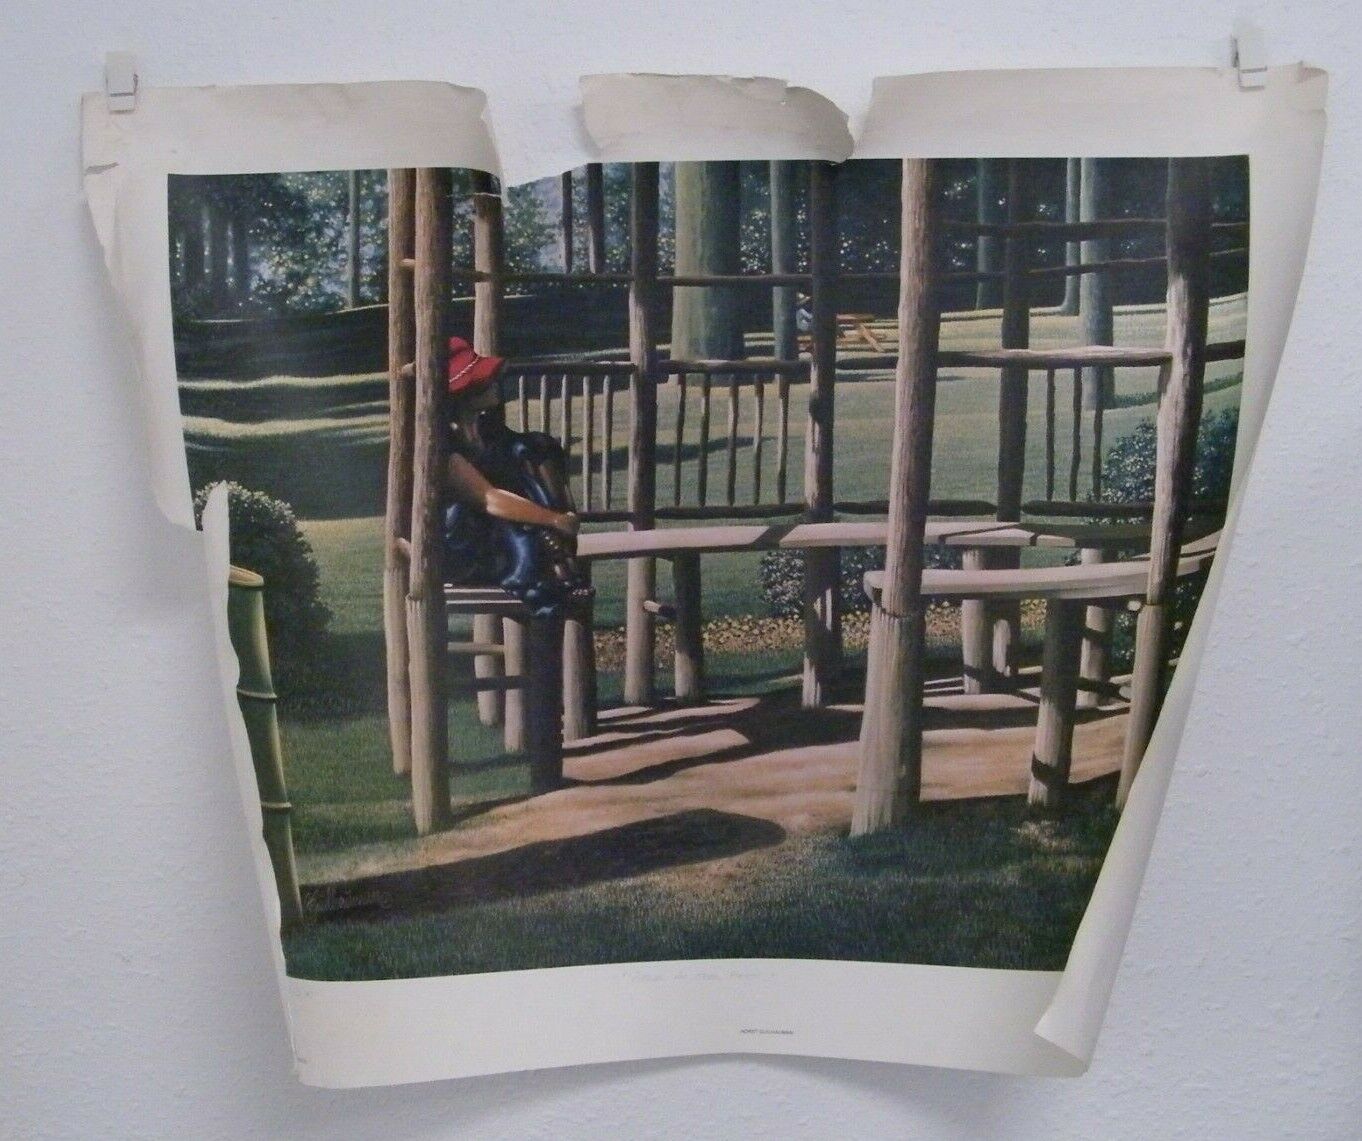 1983 HORST GUILHAUMON PRINT IDLE IN THE PARK 31/495 32